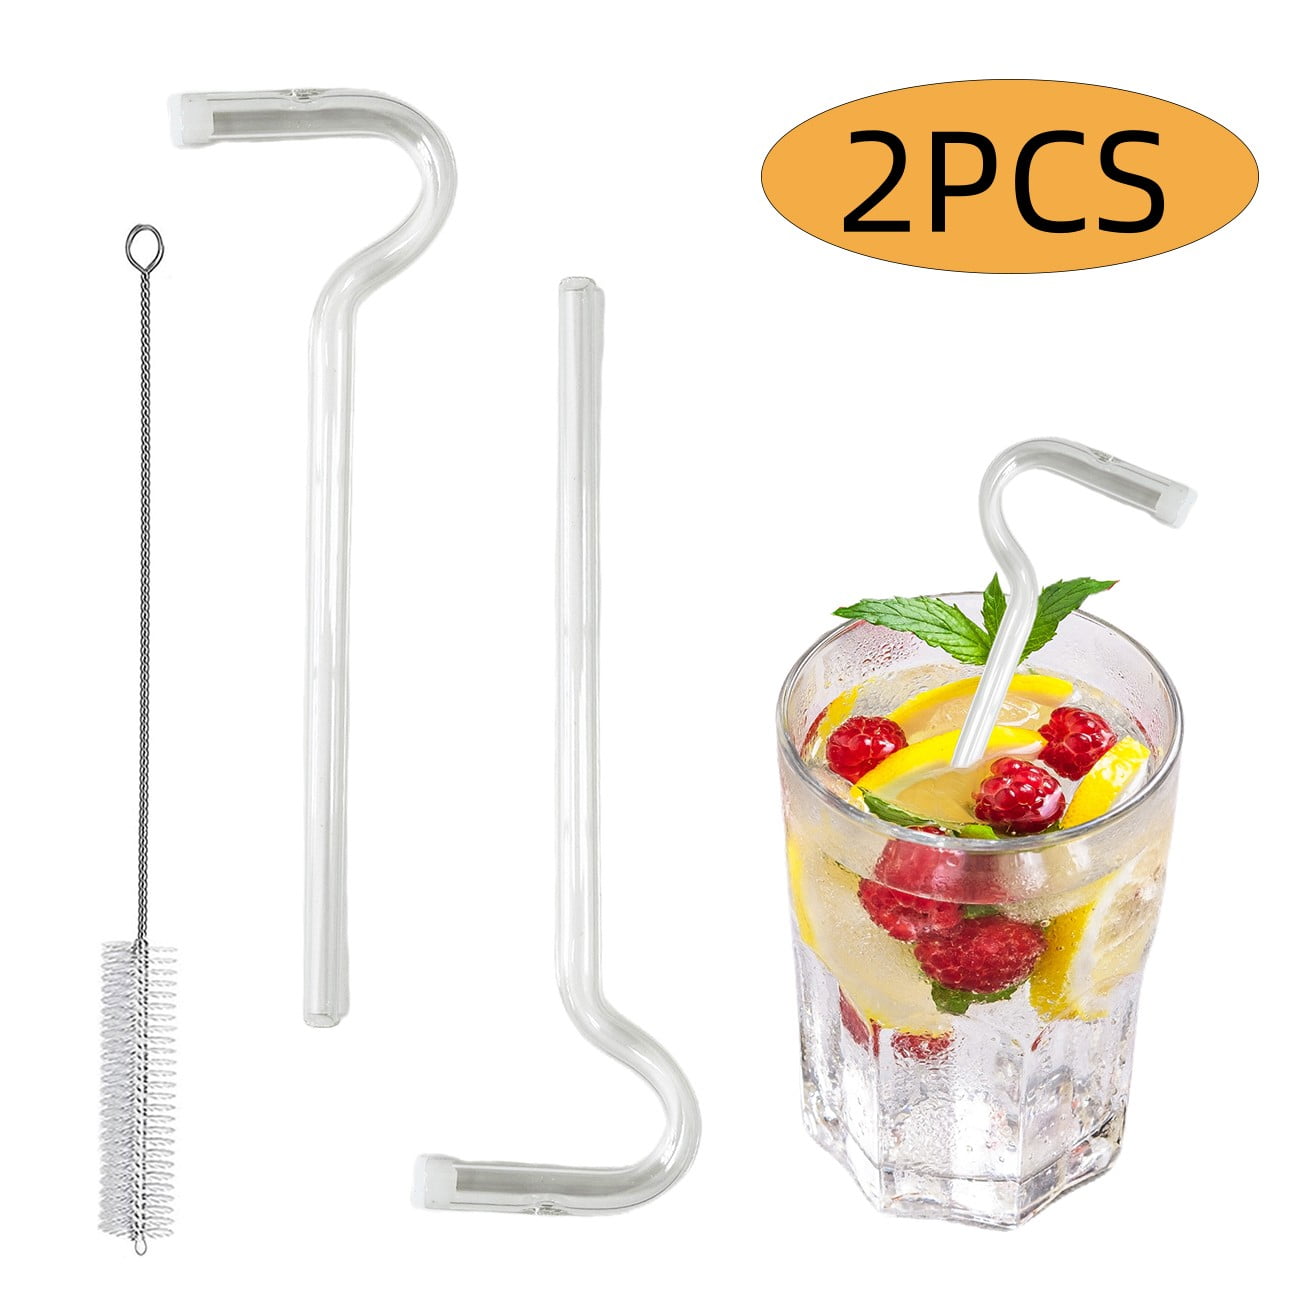 3pcs Anti Wrinkle Straws Reusable Flute Design No Wrinkle Straw Glass Drinking  Straw with Cleaning Brush for Drinks Wine Juice - AliExpress